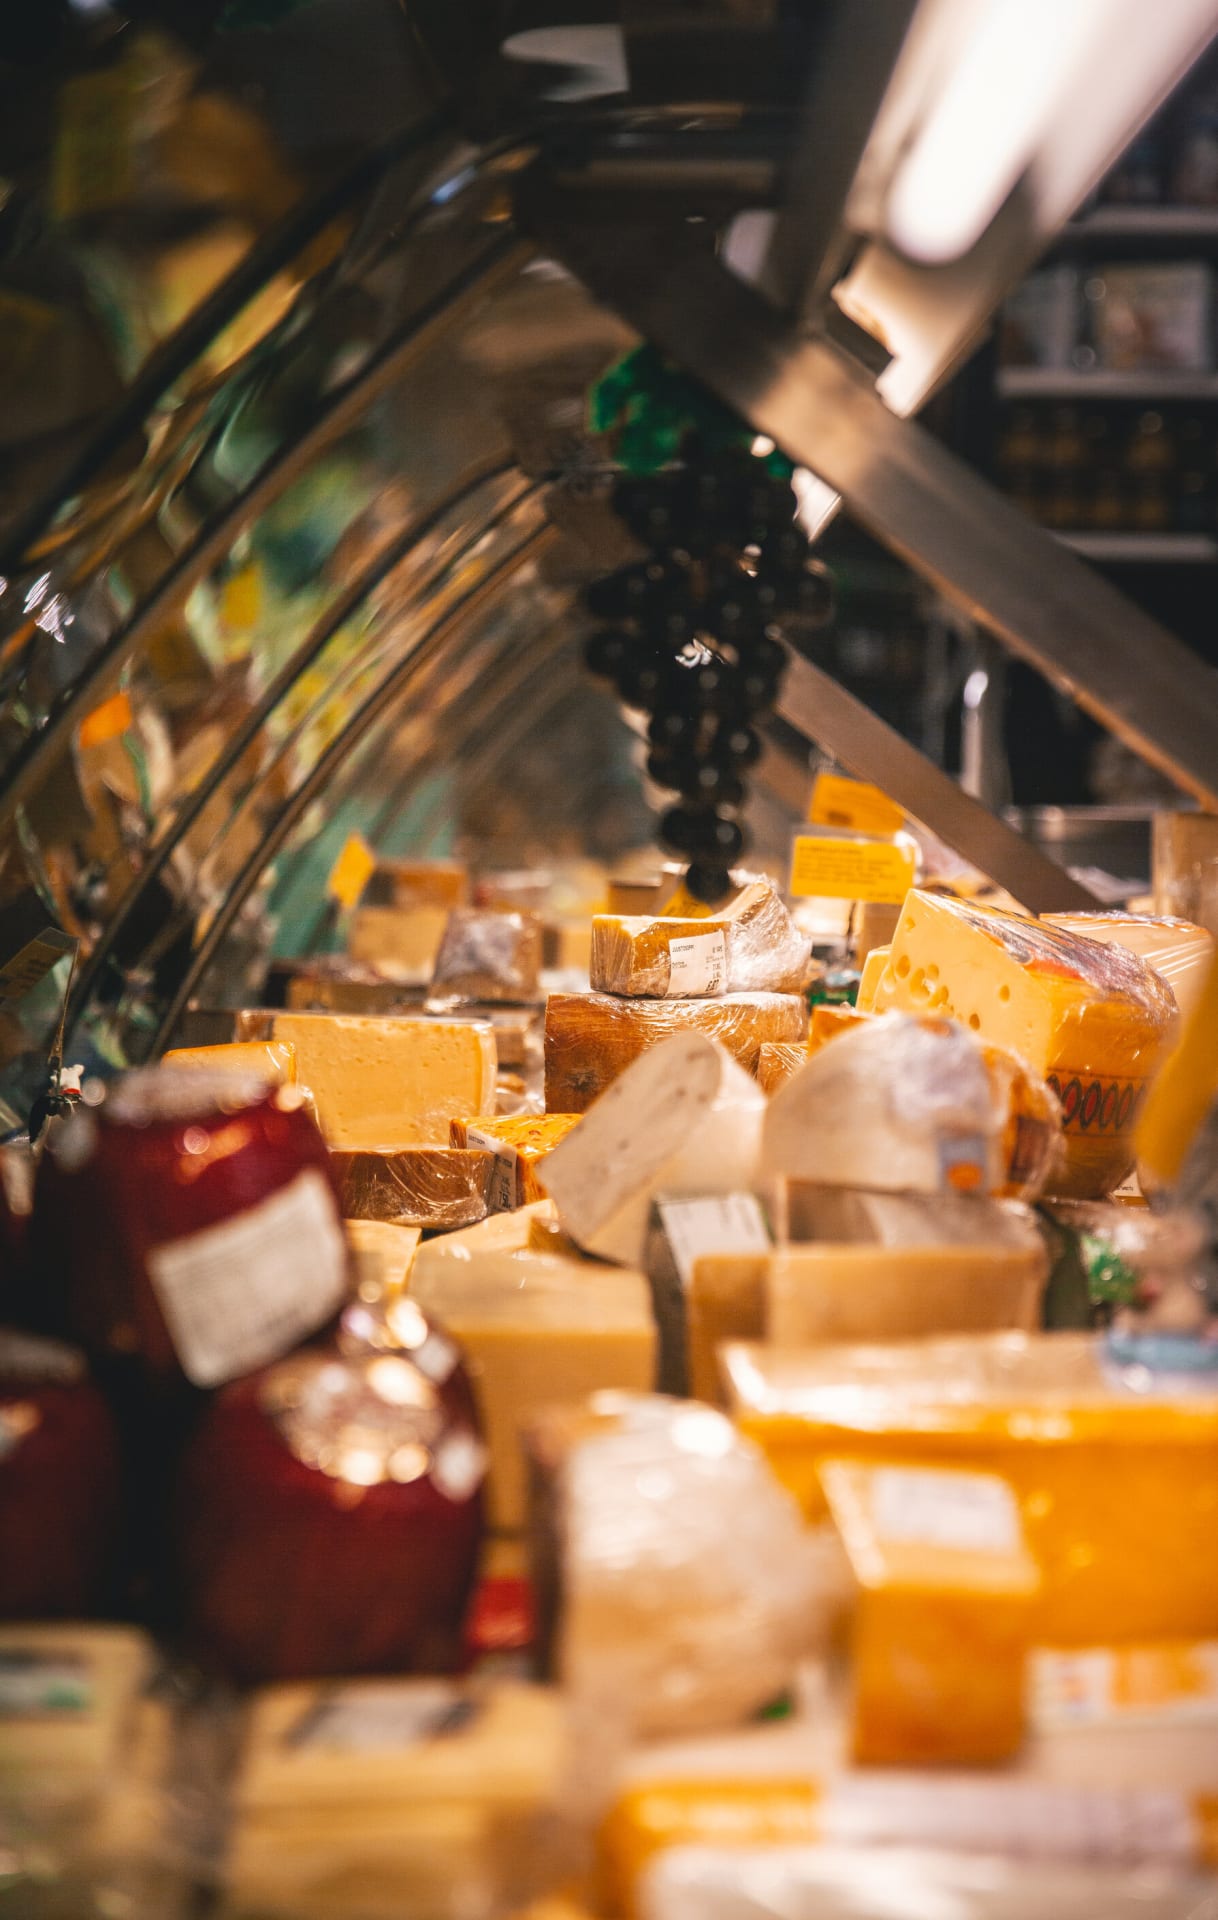 Cheese counter displaying wide variety of cheese types